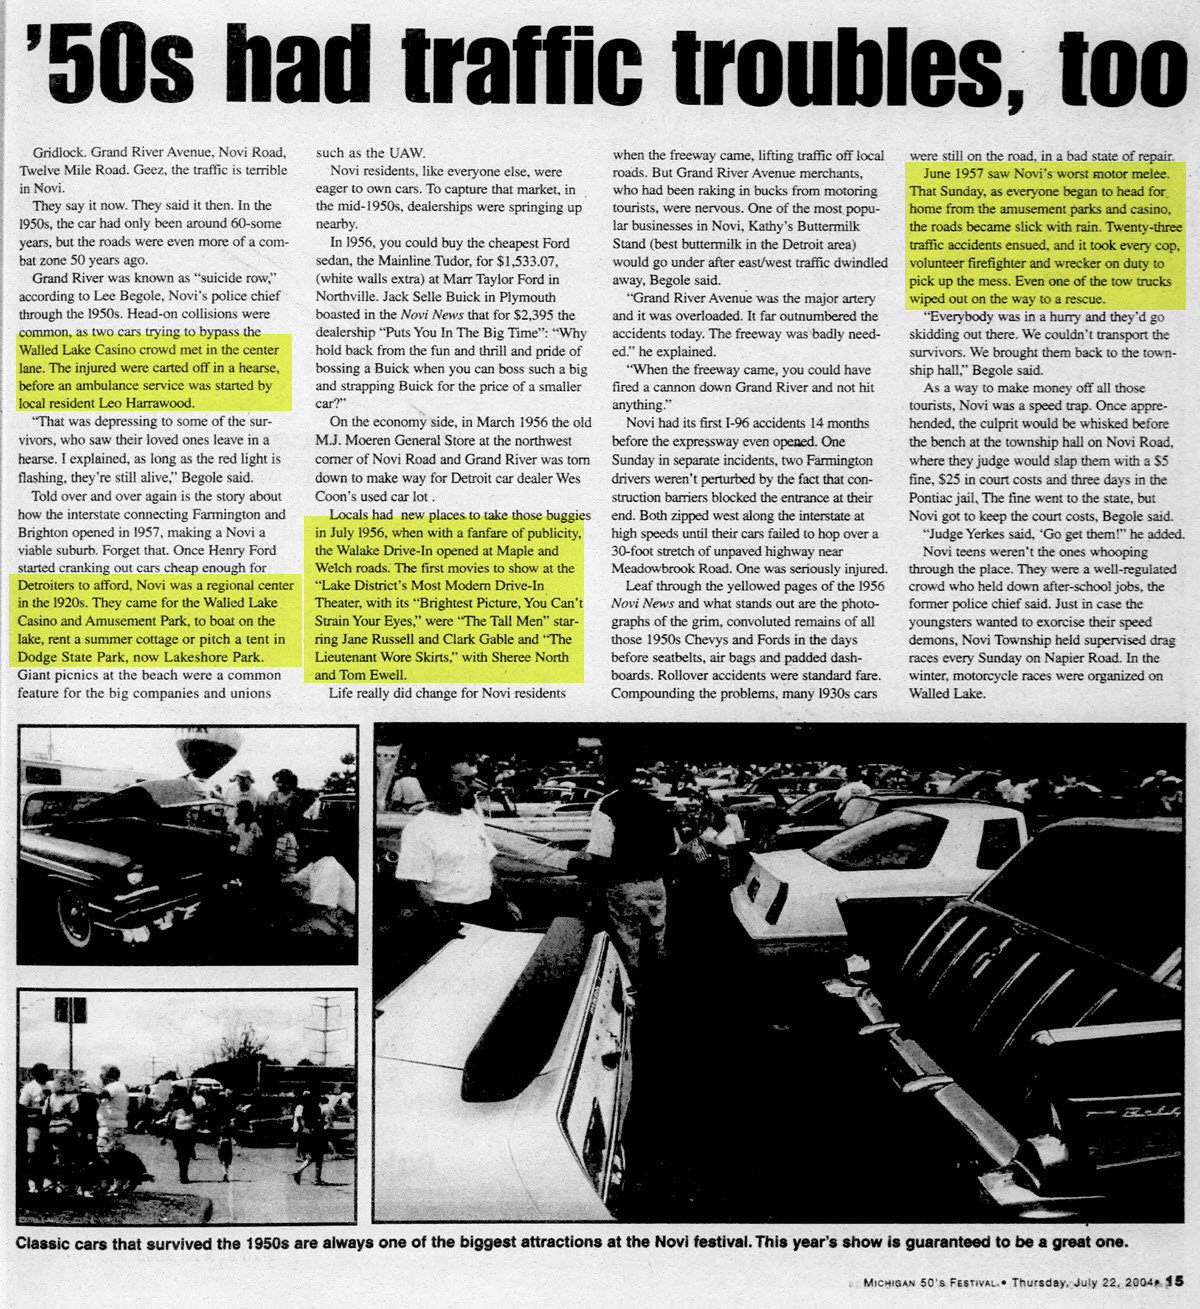 2004 article about the vintage walled lake joints Walake Drive-In Theatre, Walled Lake